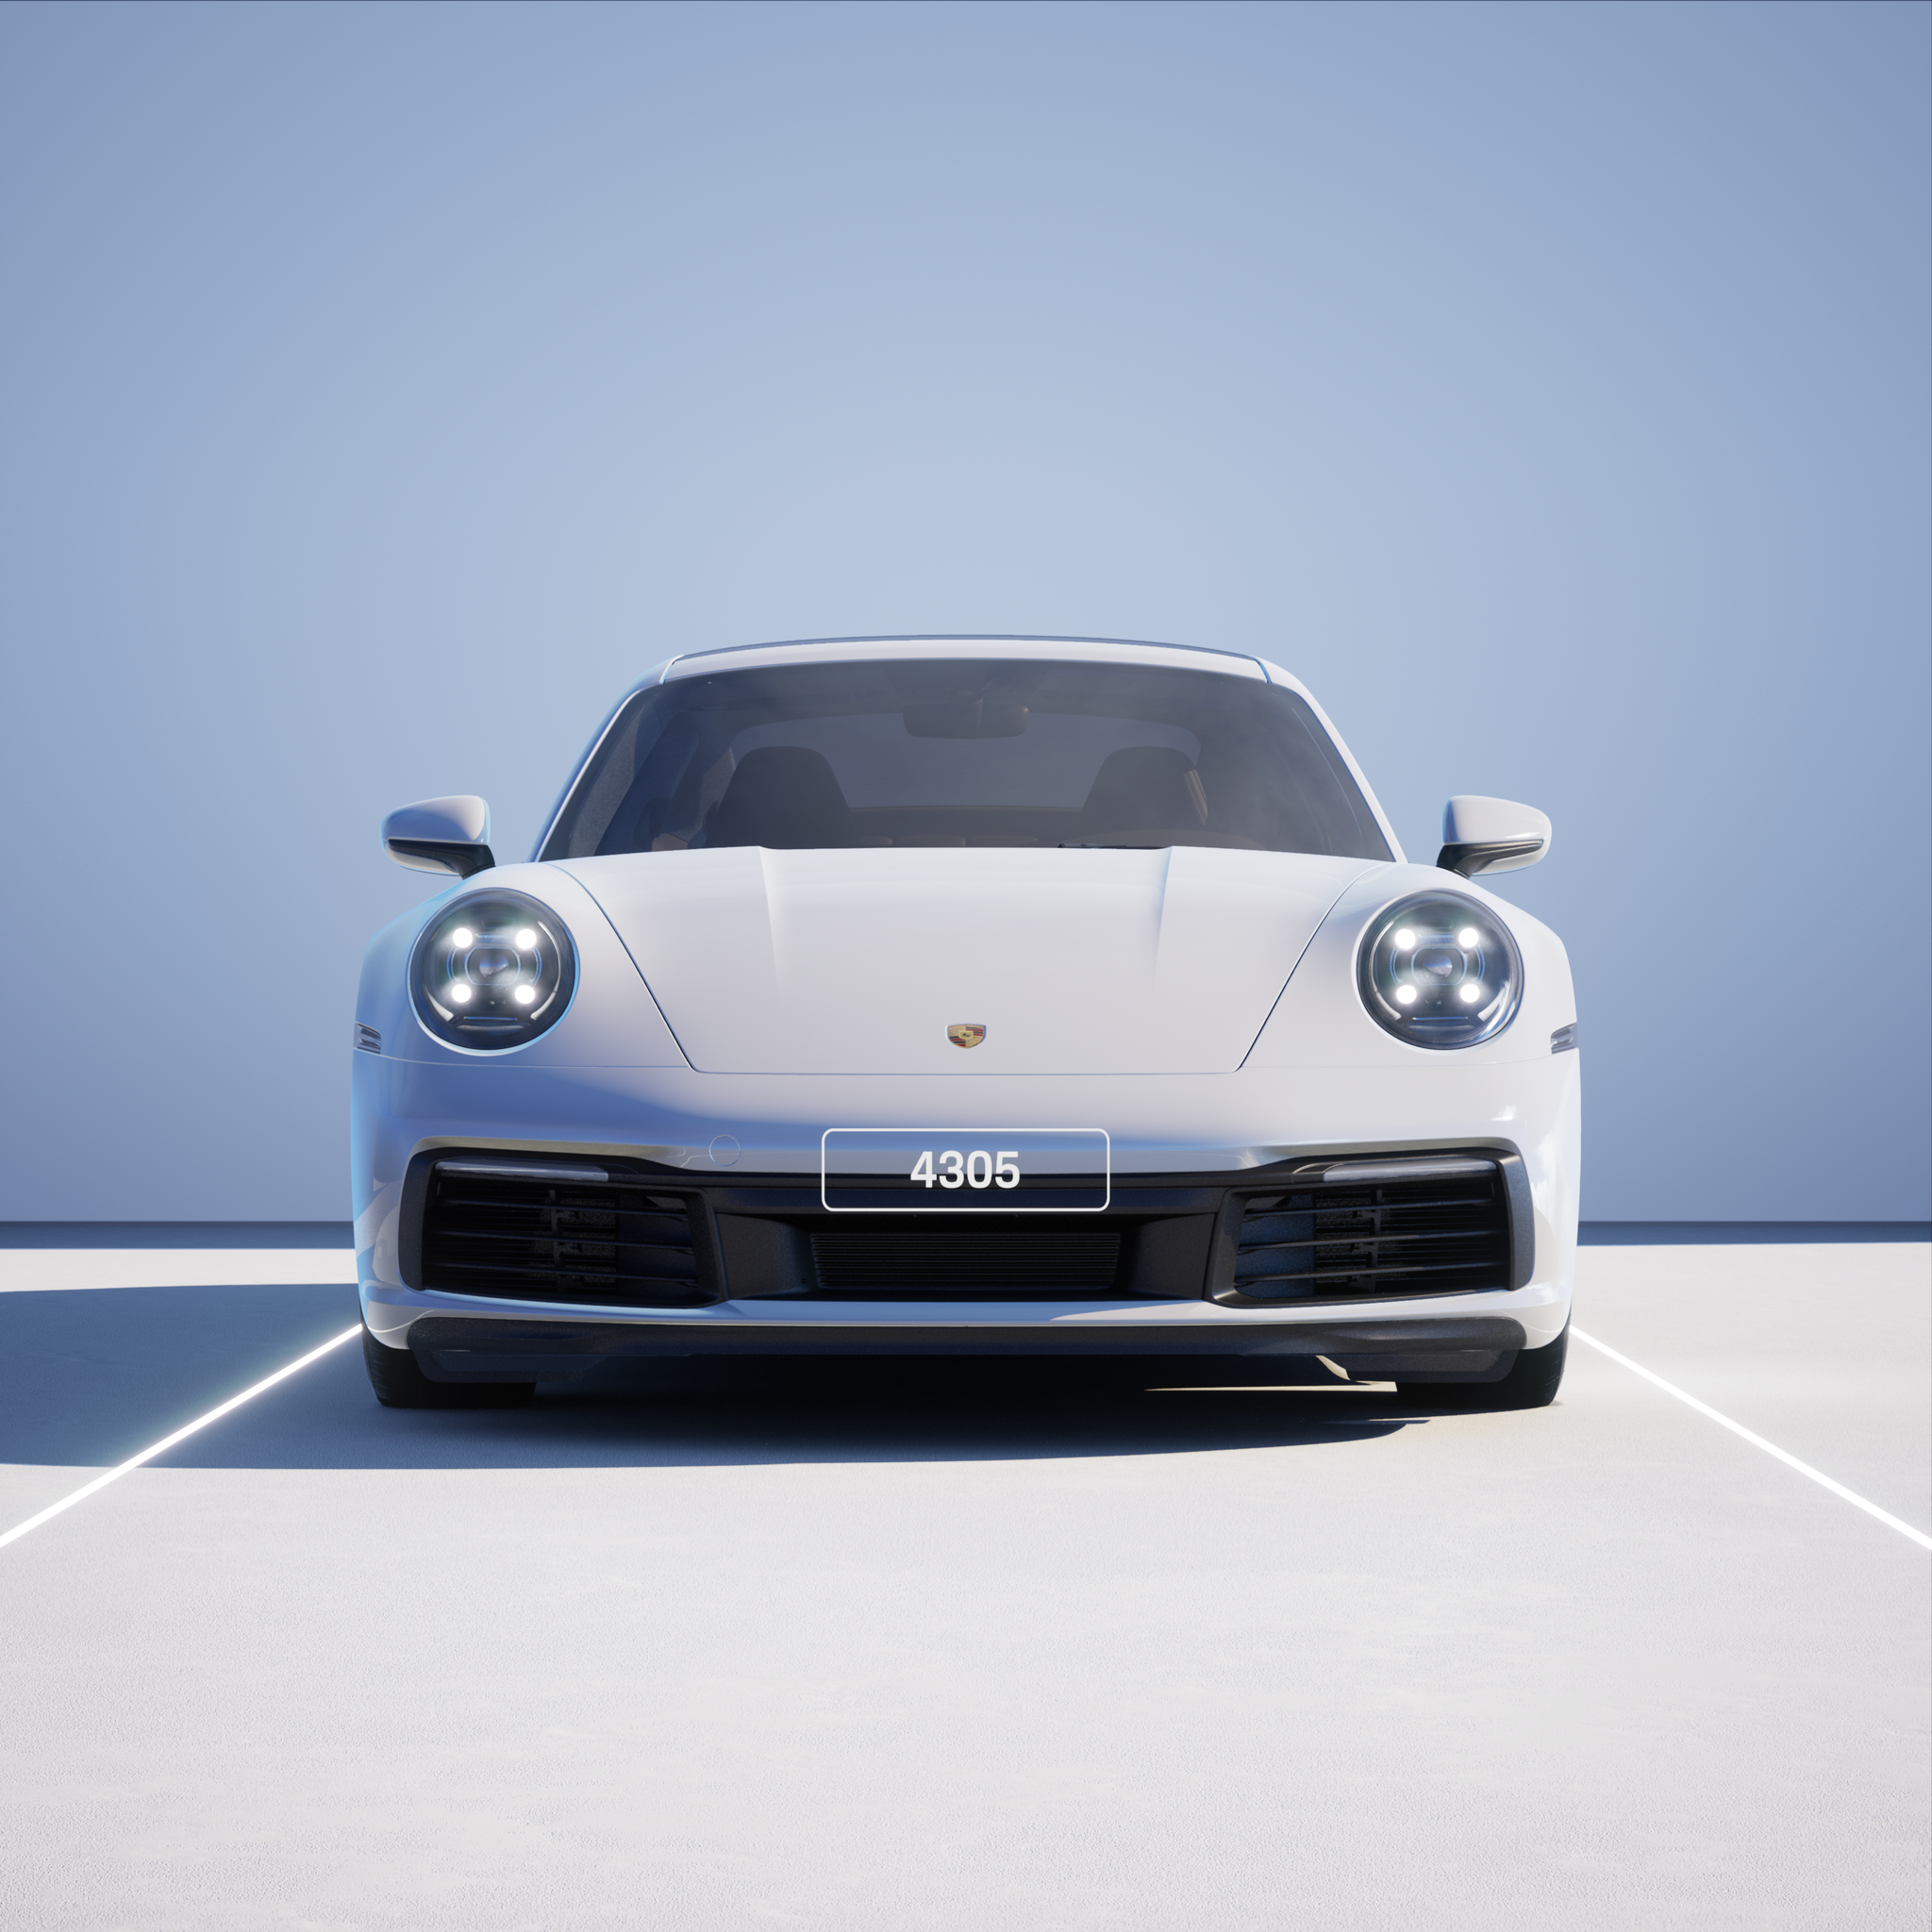 The PORSCHΞ 911 4305 image in phase